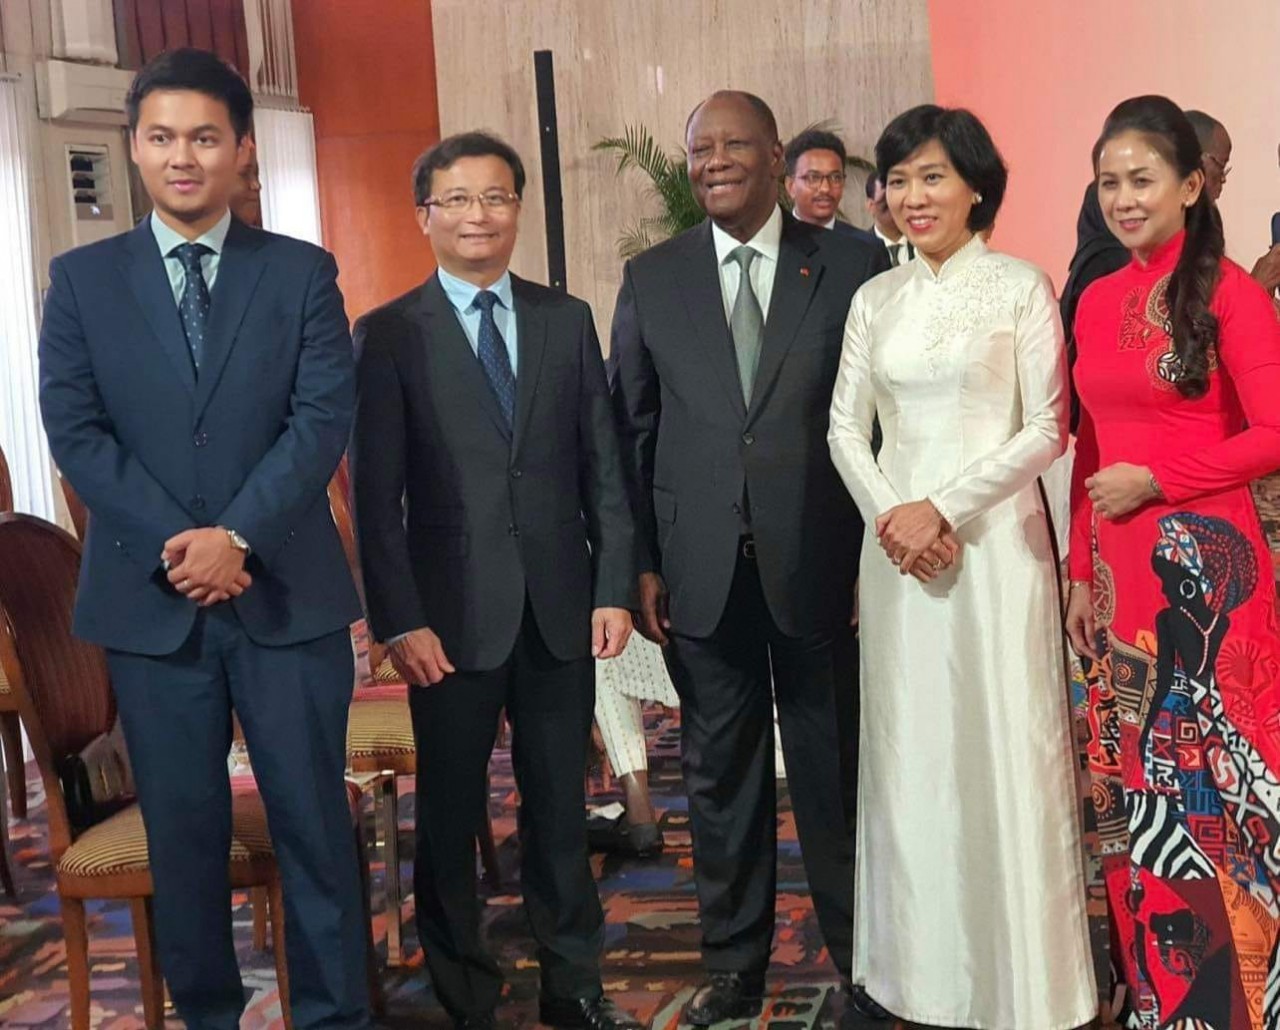 Vietnamese Ambassador to Morocco and Cote d’Ivoire Dang Thi Thu Ha presents letter of credentials to President of Cote d’Ivoire Alassane Ouattara. Photo: Vietnamese embassy